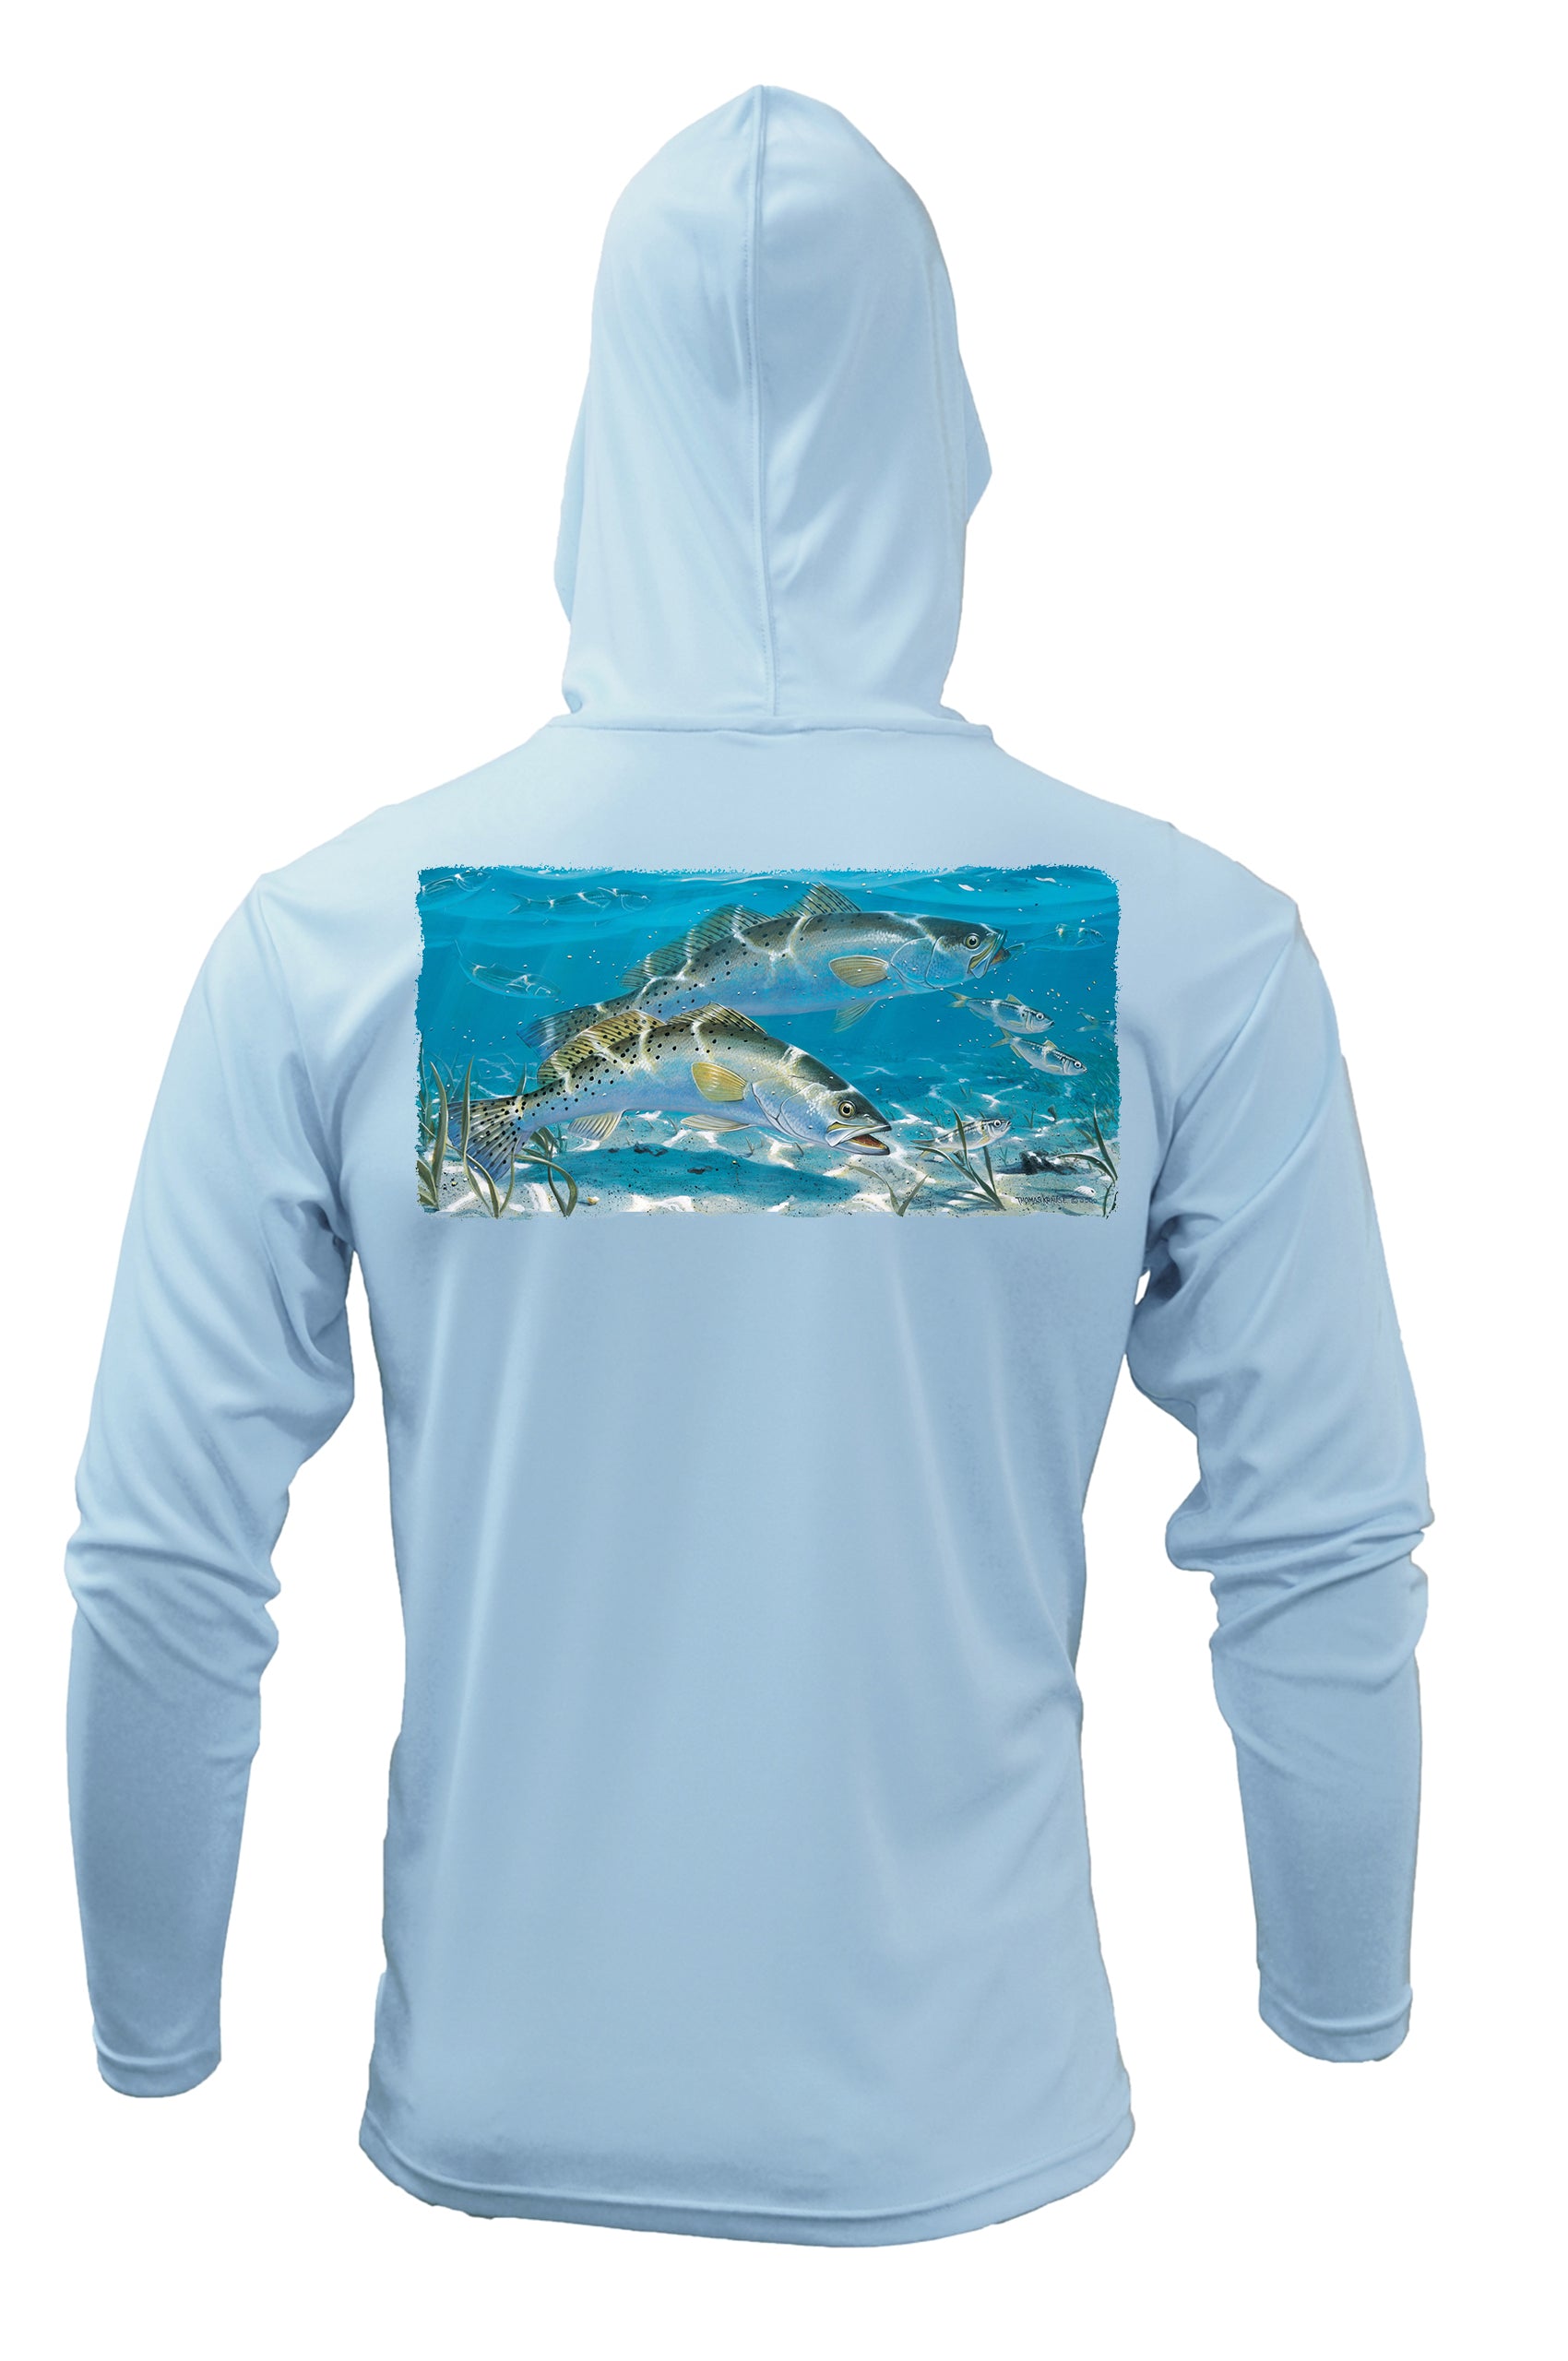 Spotted Sea Trout Fishing Hoodie Optional Flag Sleeve X-Large / Ice Blue